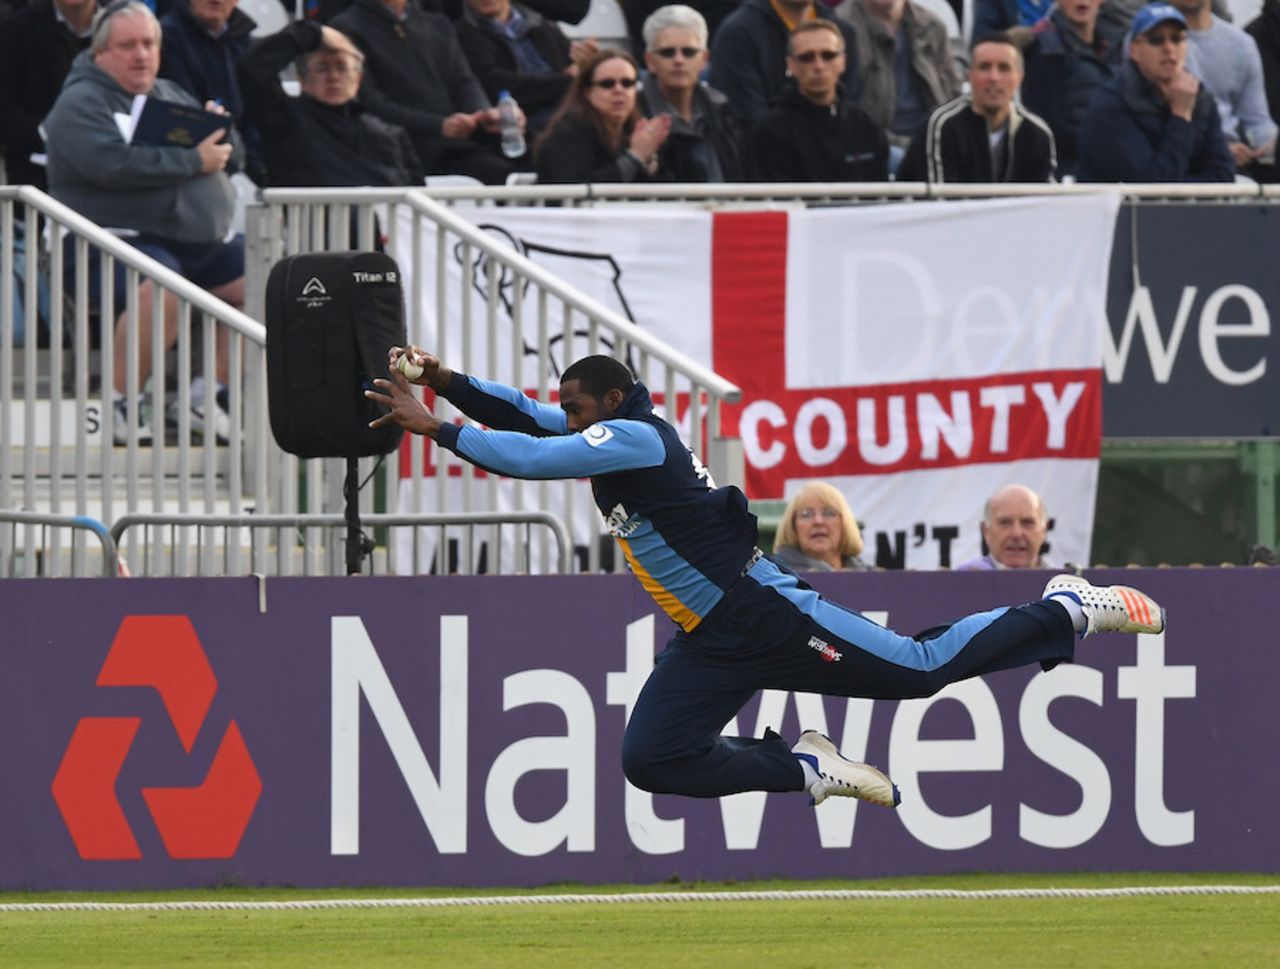 Chesney Hughes dives full-length for a catch, Derbyshire v Leicestershire, NatWest T20 Blast, North Group, Derby, June 3, 2016